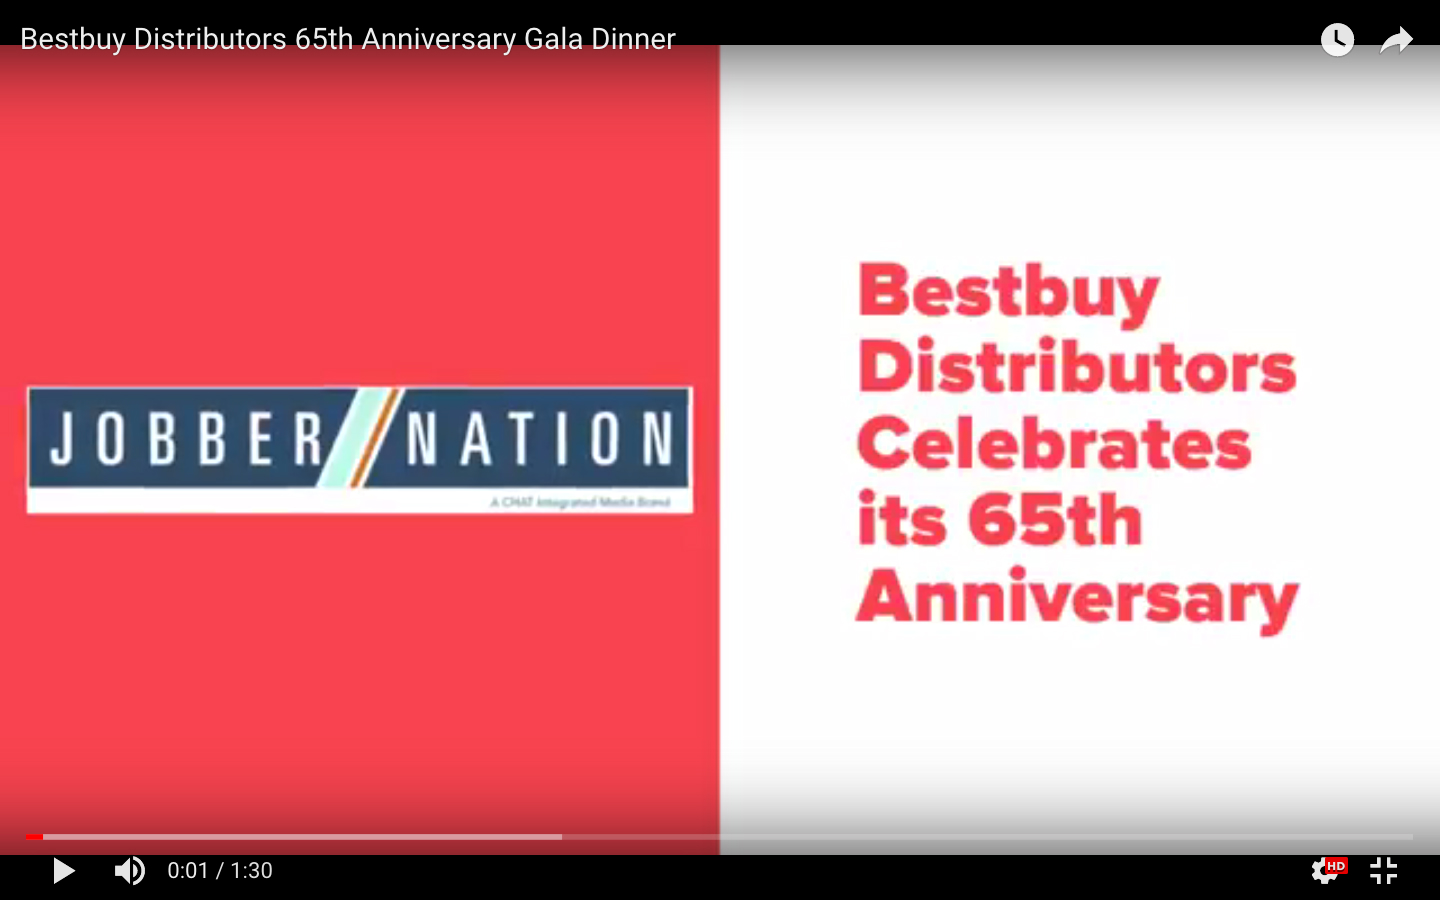 Bestbuy Distributors marks 65 years with gala event